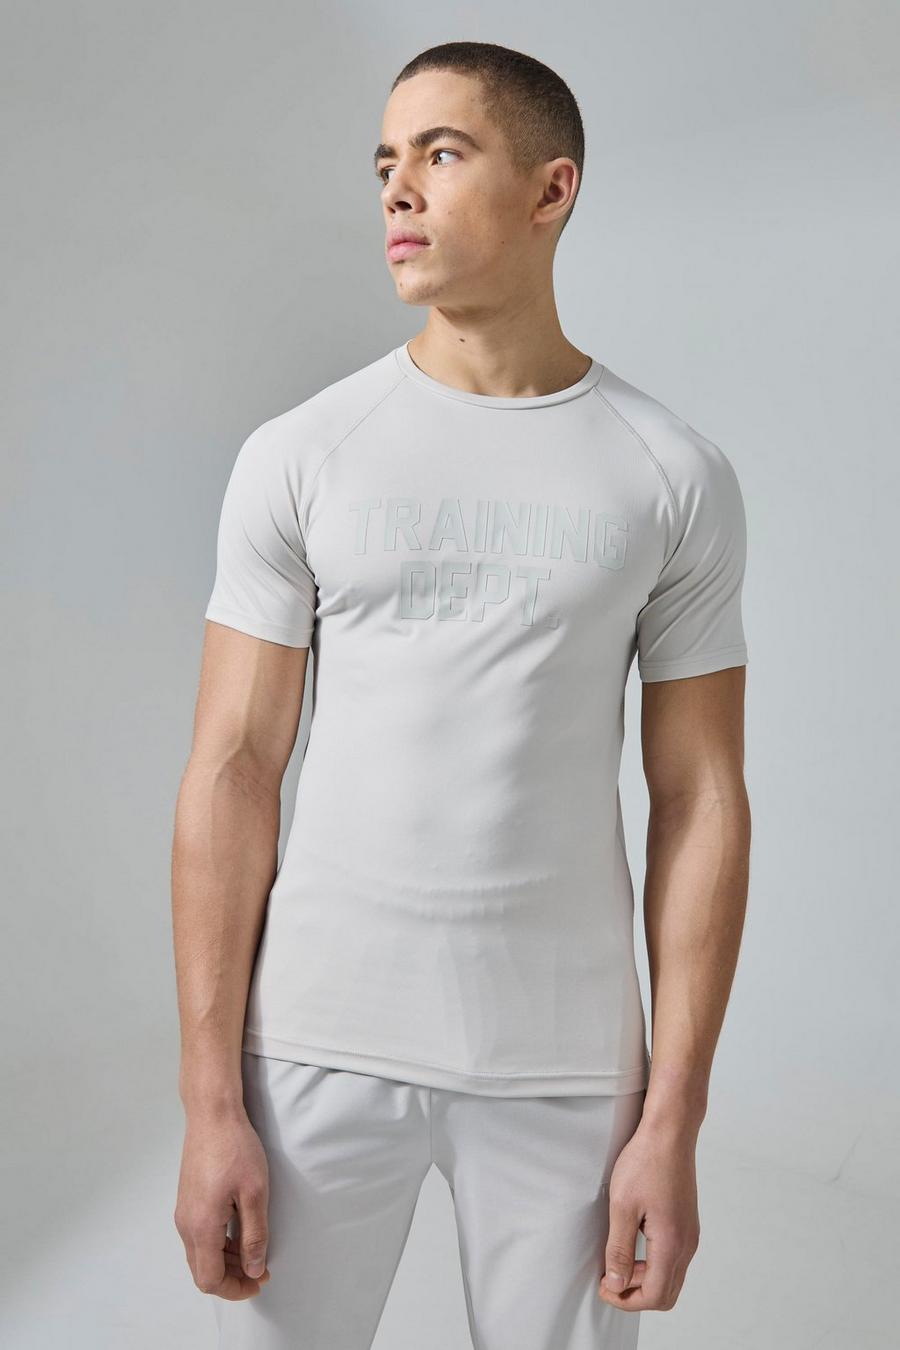 Active Trainings Dept Muscle-Fit T-Shirt, Light grey